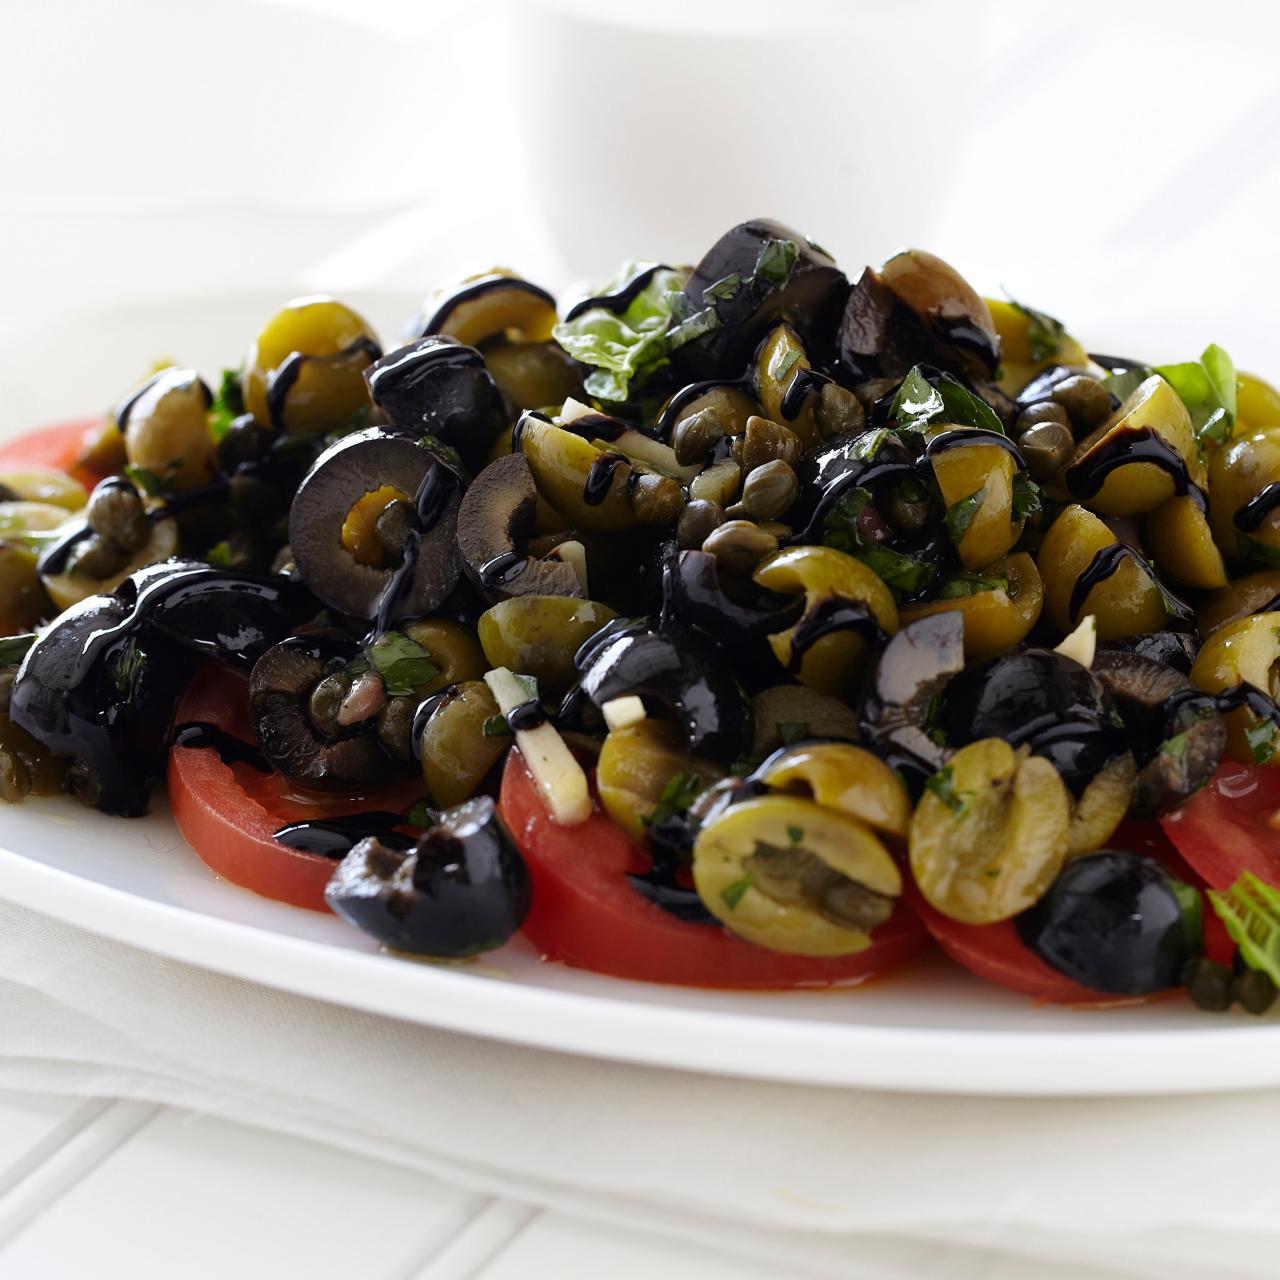 15 Recipes for a Summer Cookout with California Ripe Olives